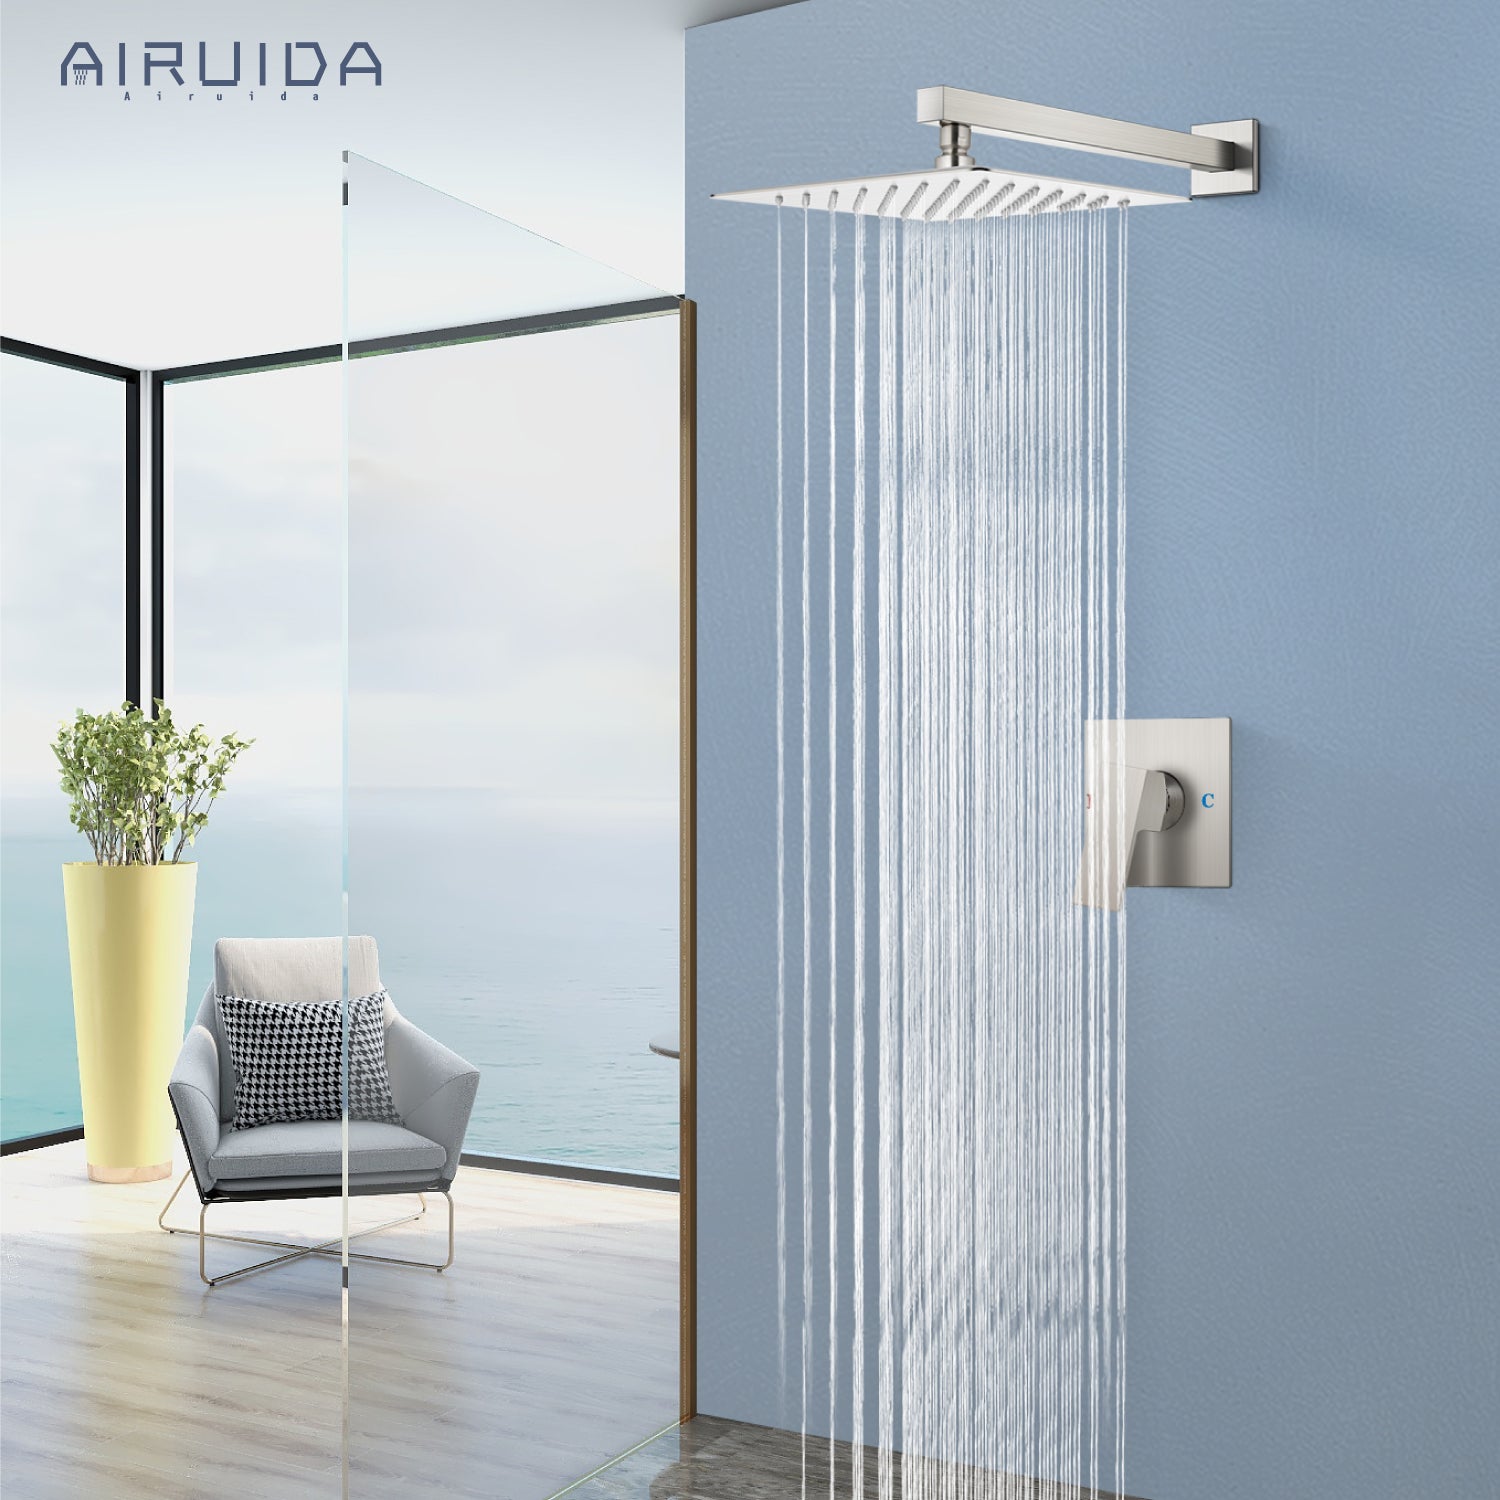 Airuida Shower Faucet Set, Single Function Wall Mount Bathroom Rainfall Shower System, Shower Head Shower Valve and Trim Kit with Male Thread Rough-in Valve